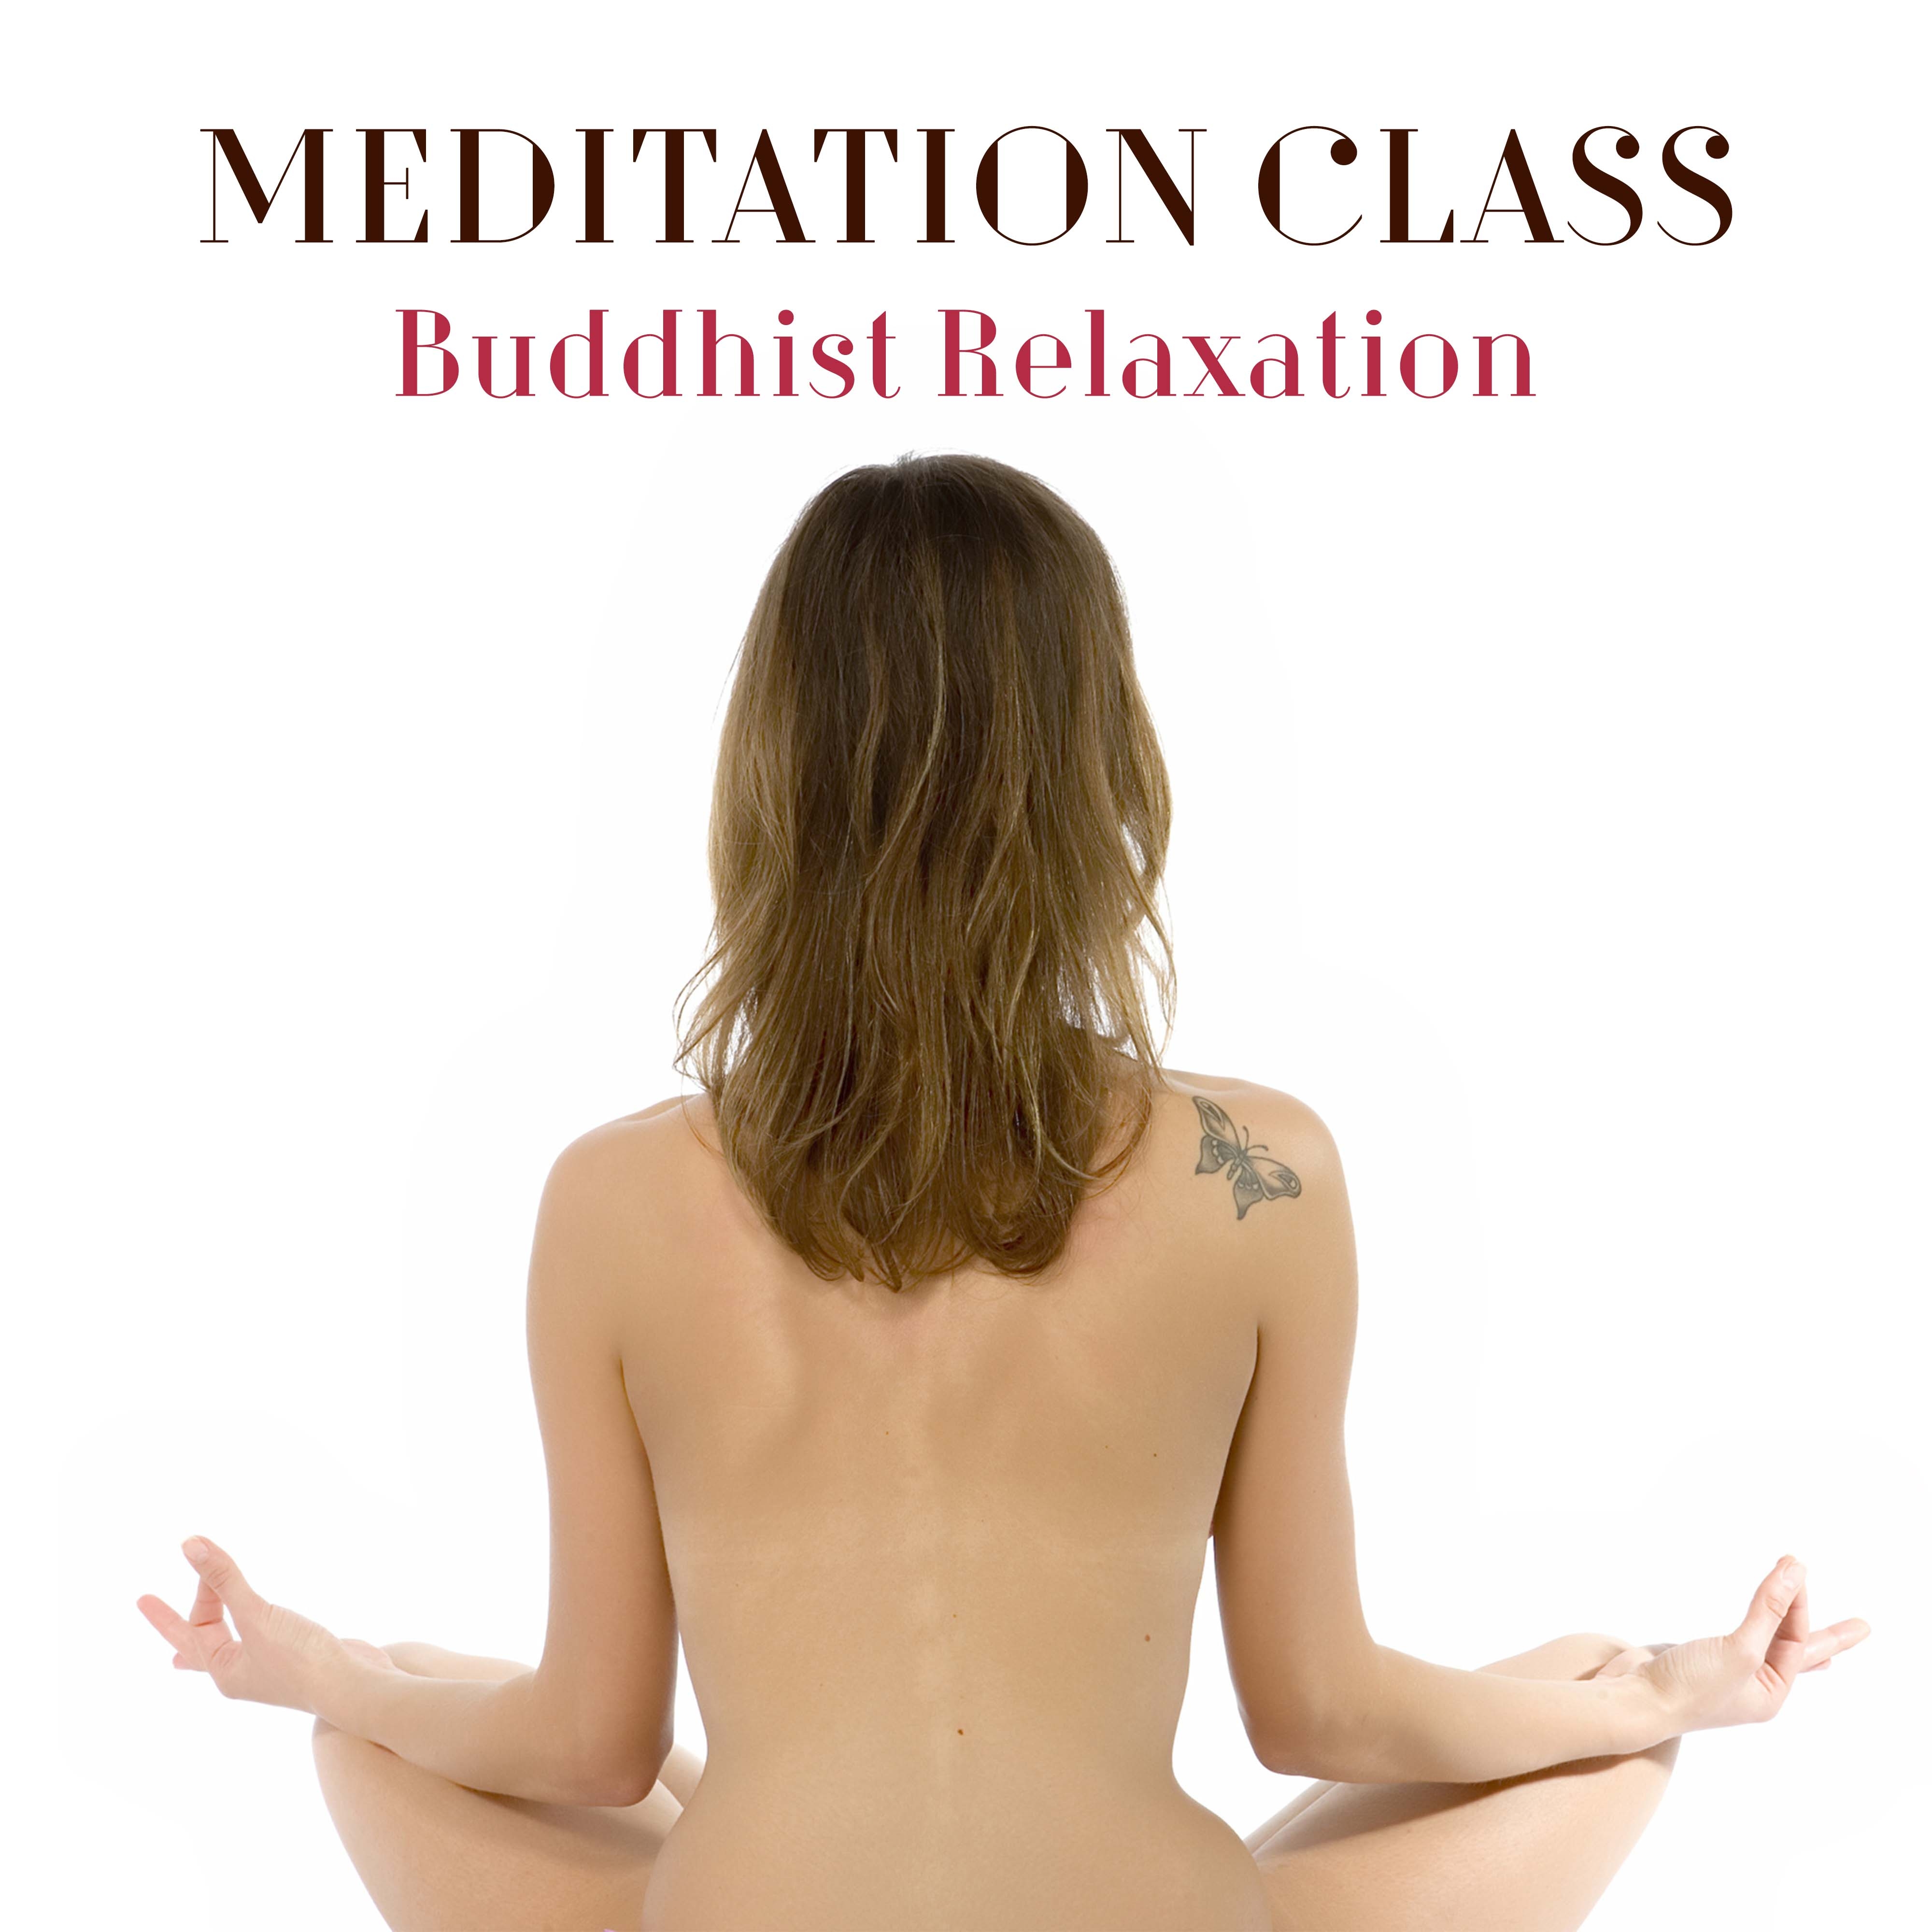 Meditation Class - Buddhist Relaxation with the Best Soothing and Calming New Age Music